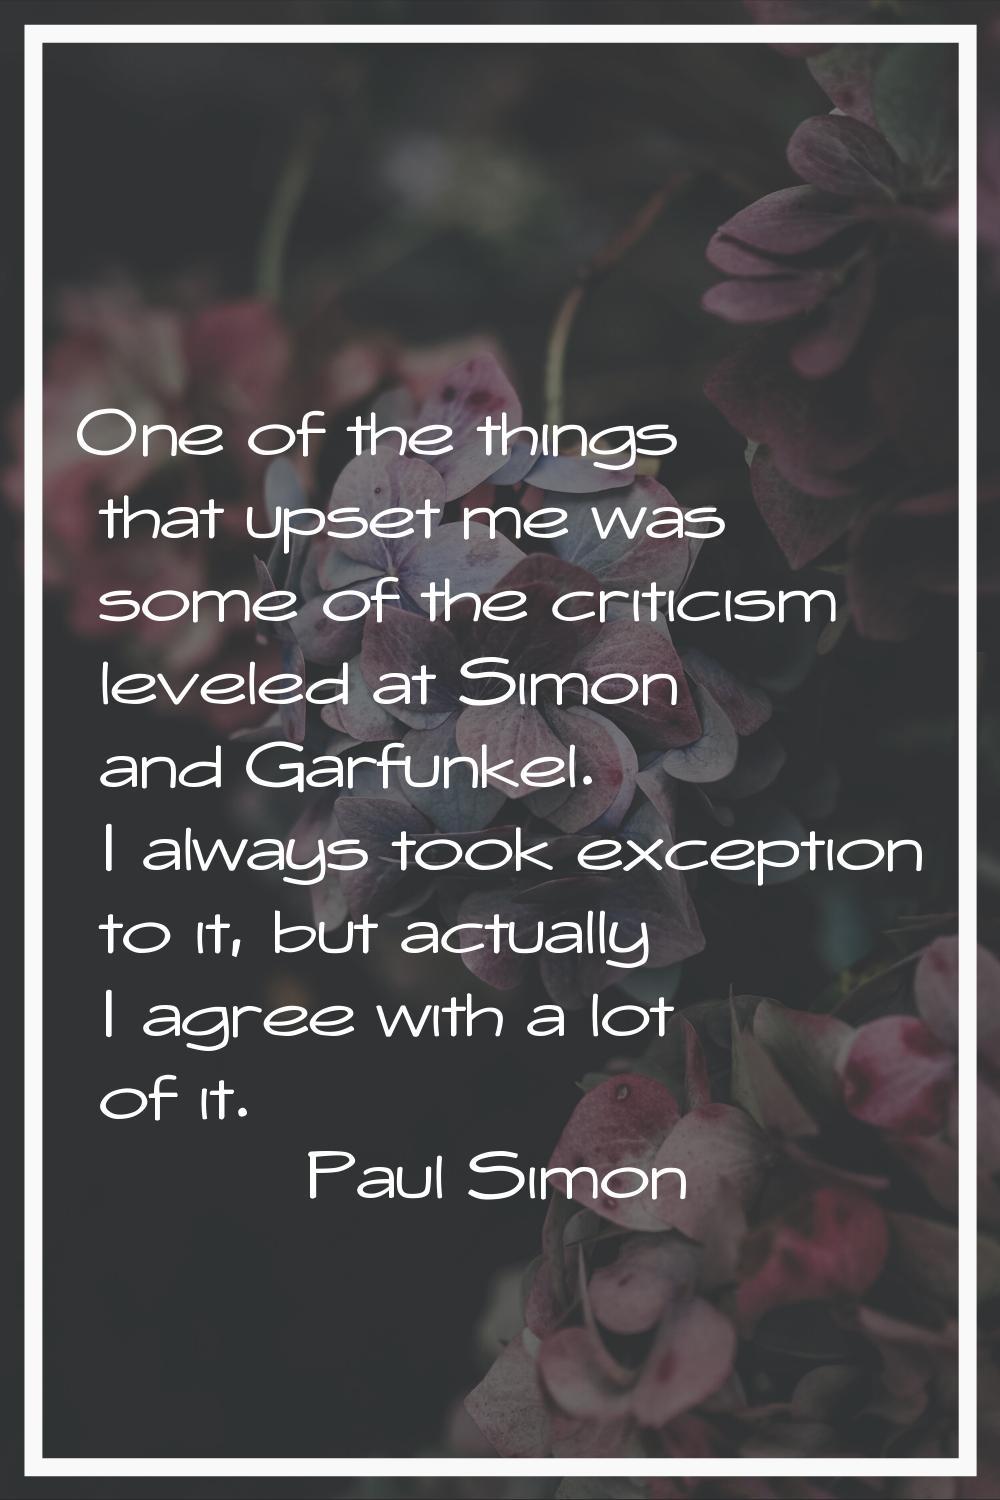 One of the things that upset me was some of the criticism leveled at Simon and Garfunkel. I always 